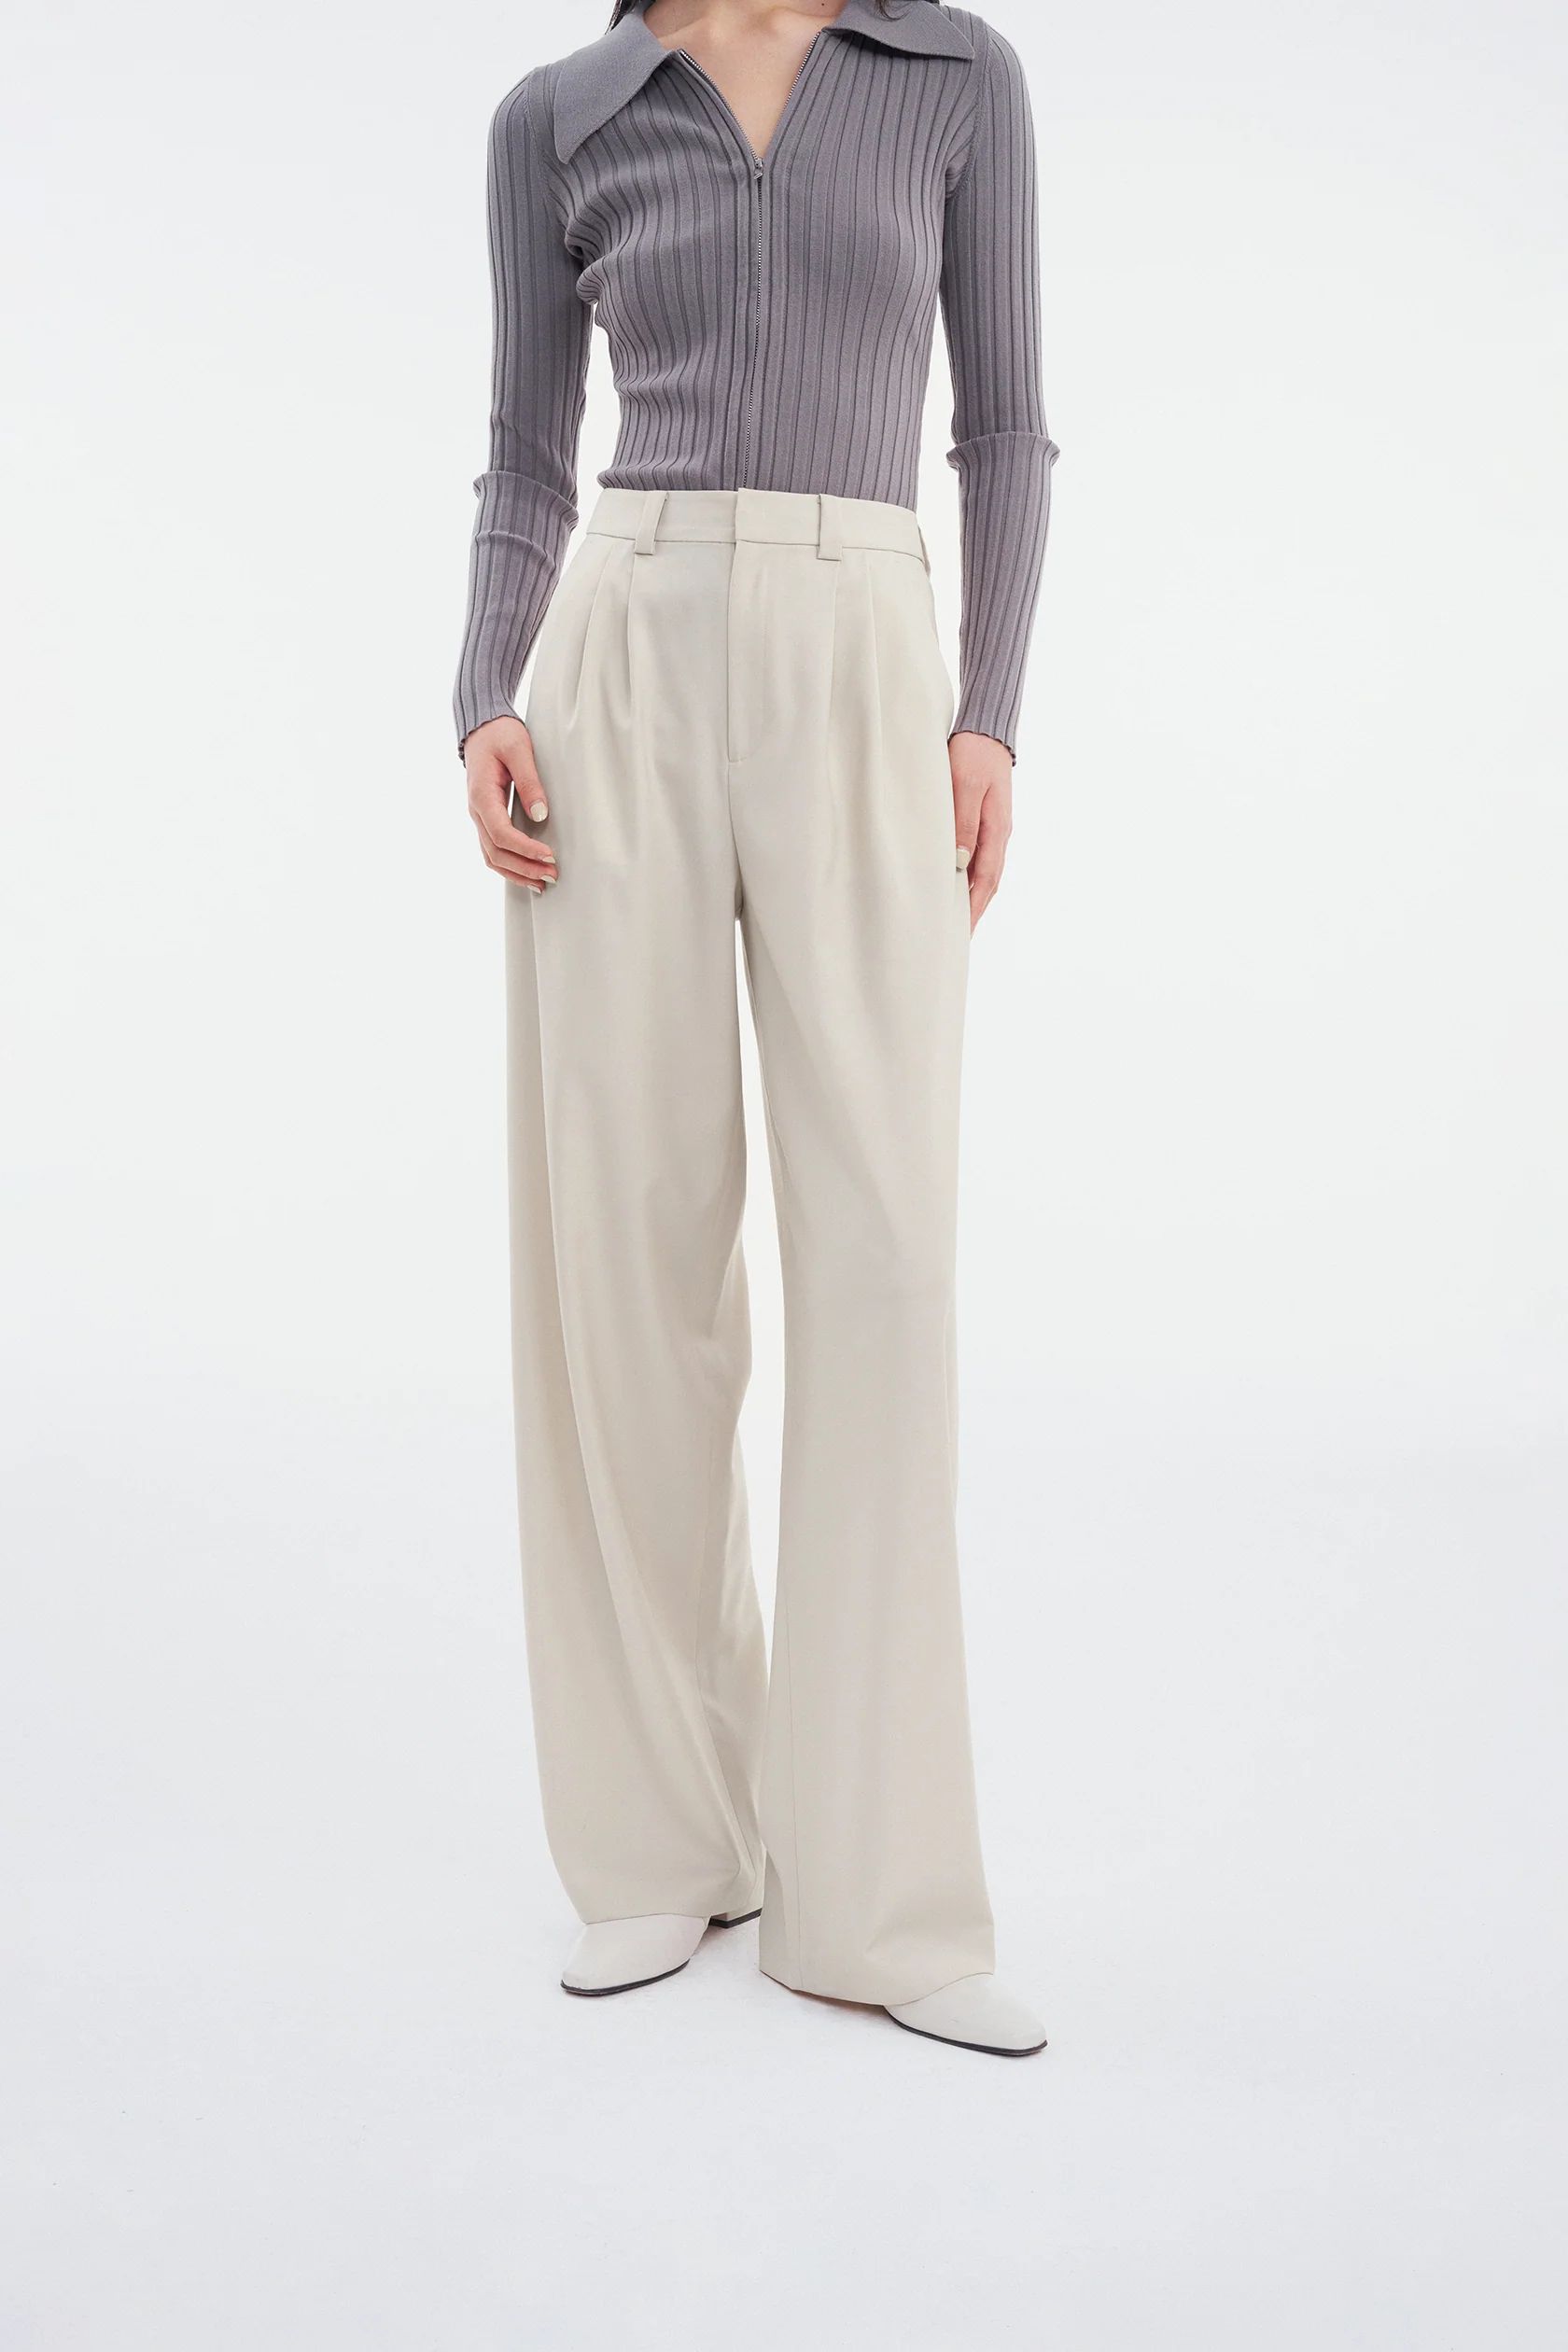 Mera Pleated Trousers in Worsted Wool | Fabrique